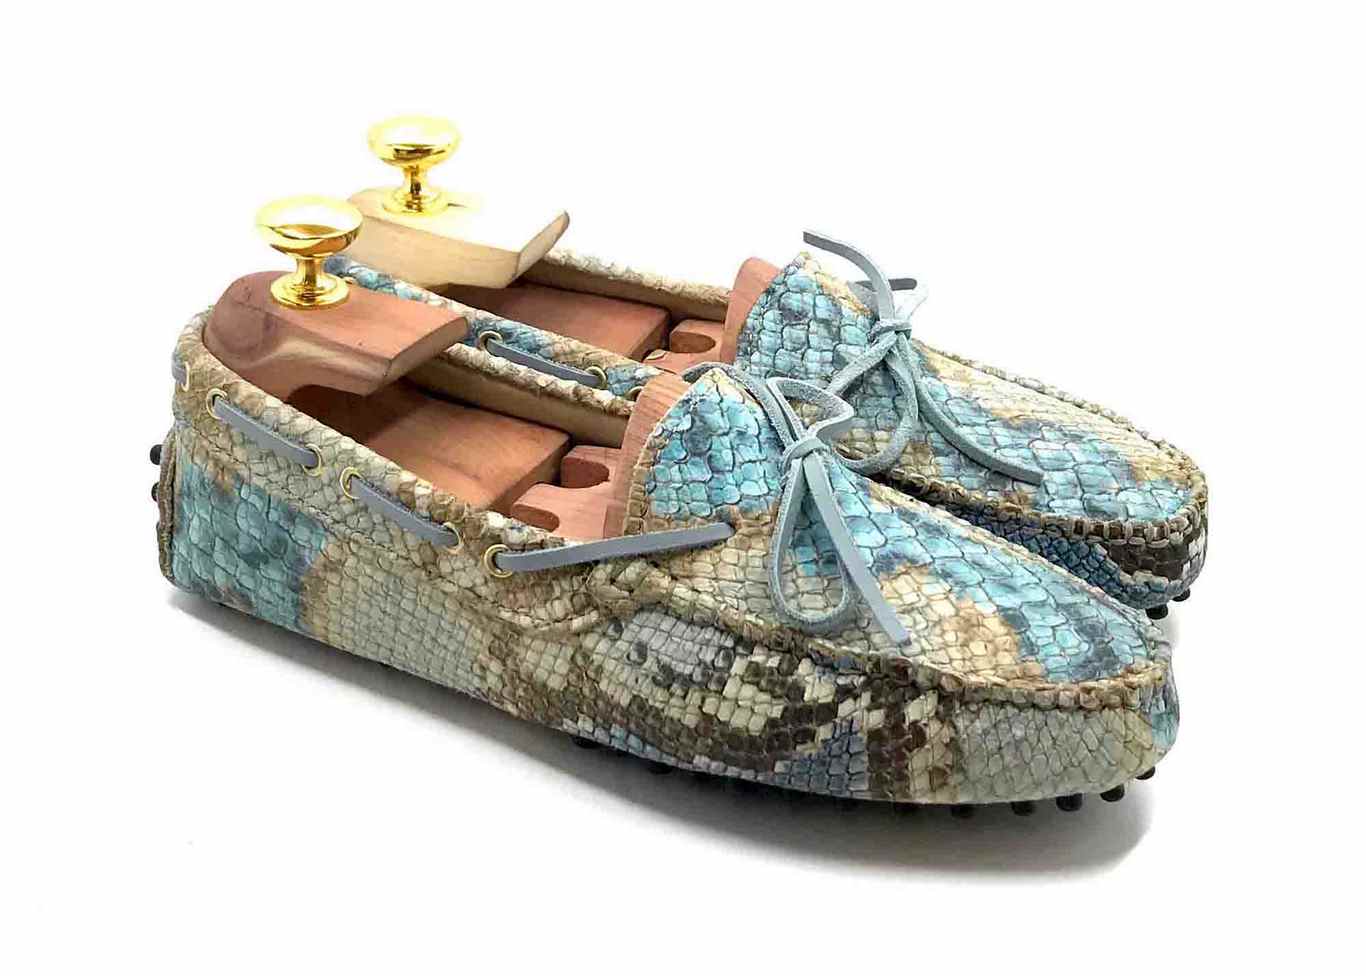 Loafers 'Drive' in printed python Calfskin leather